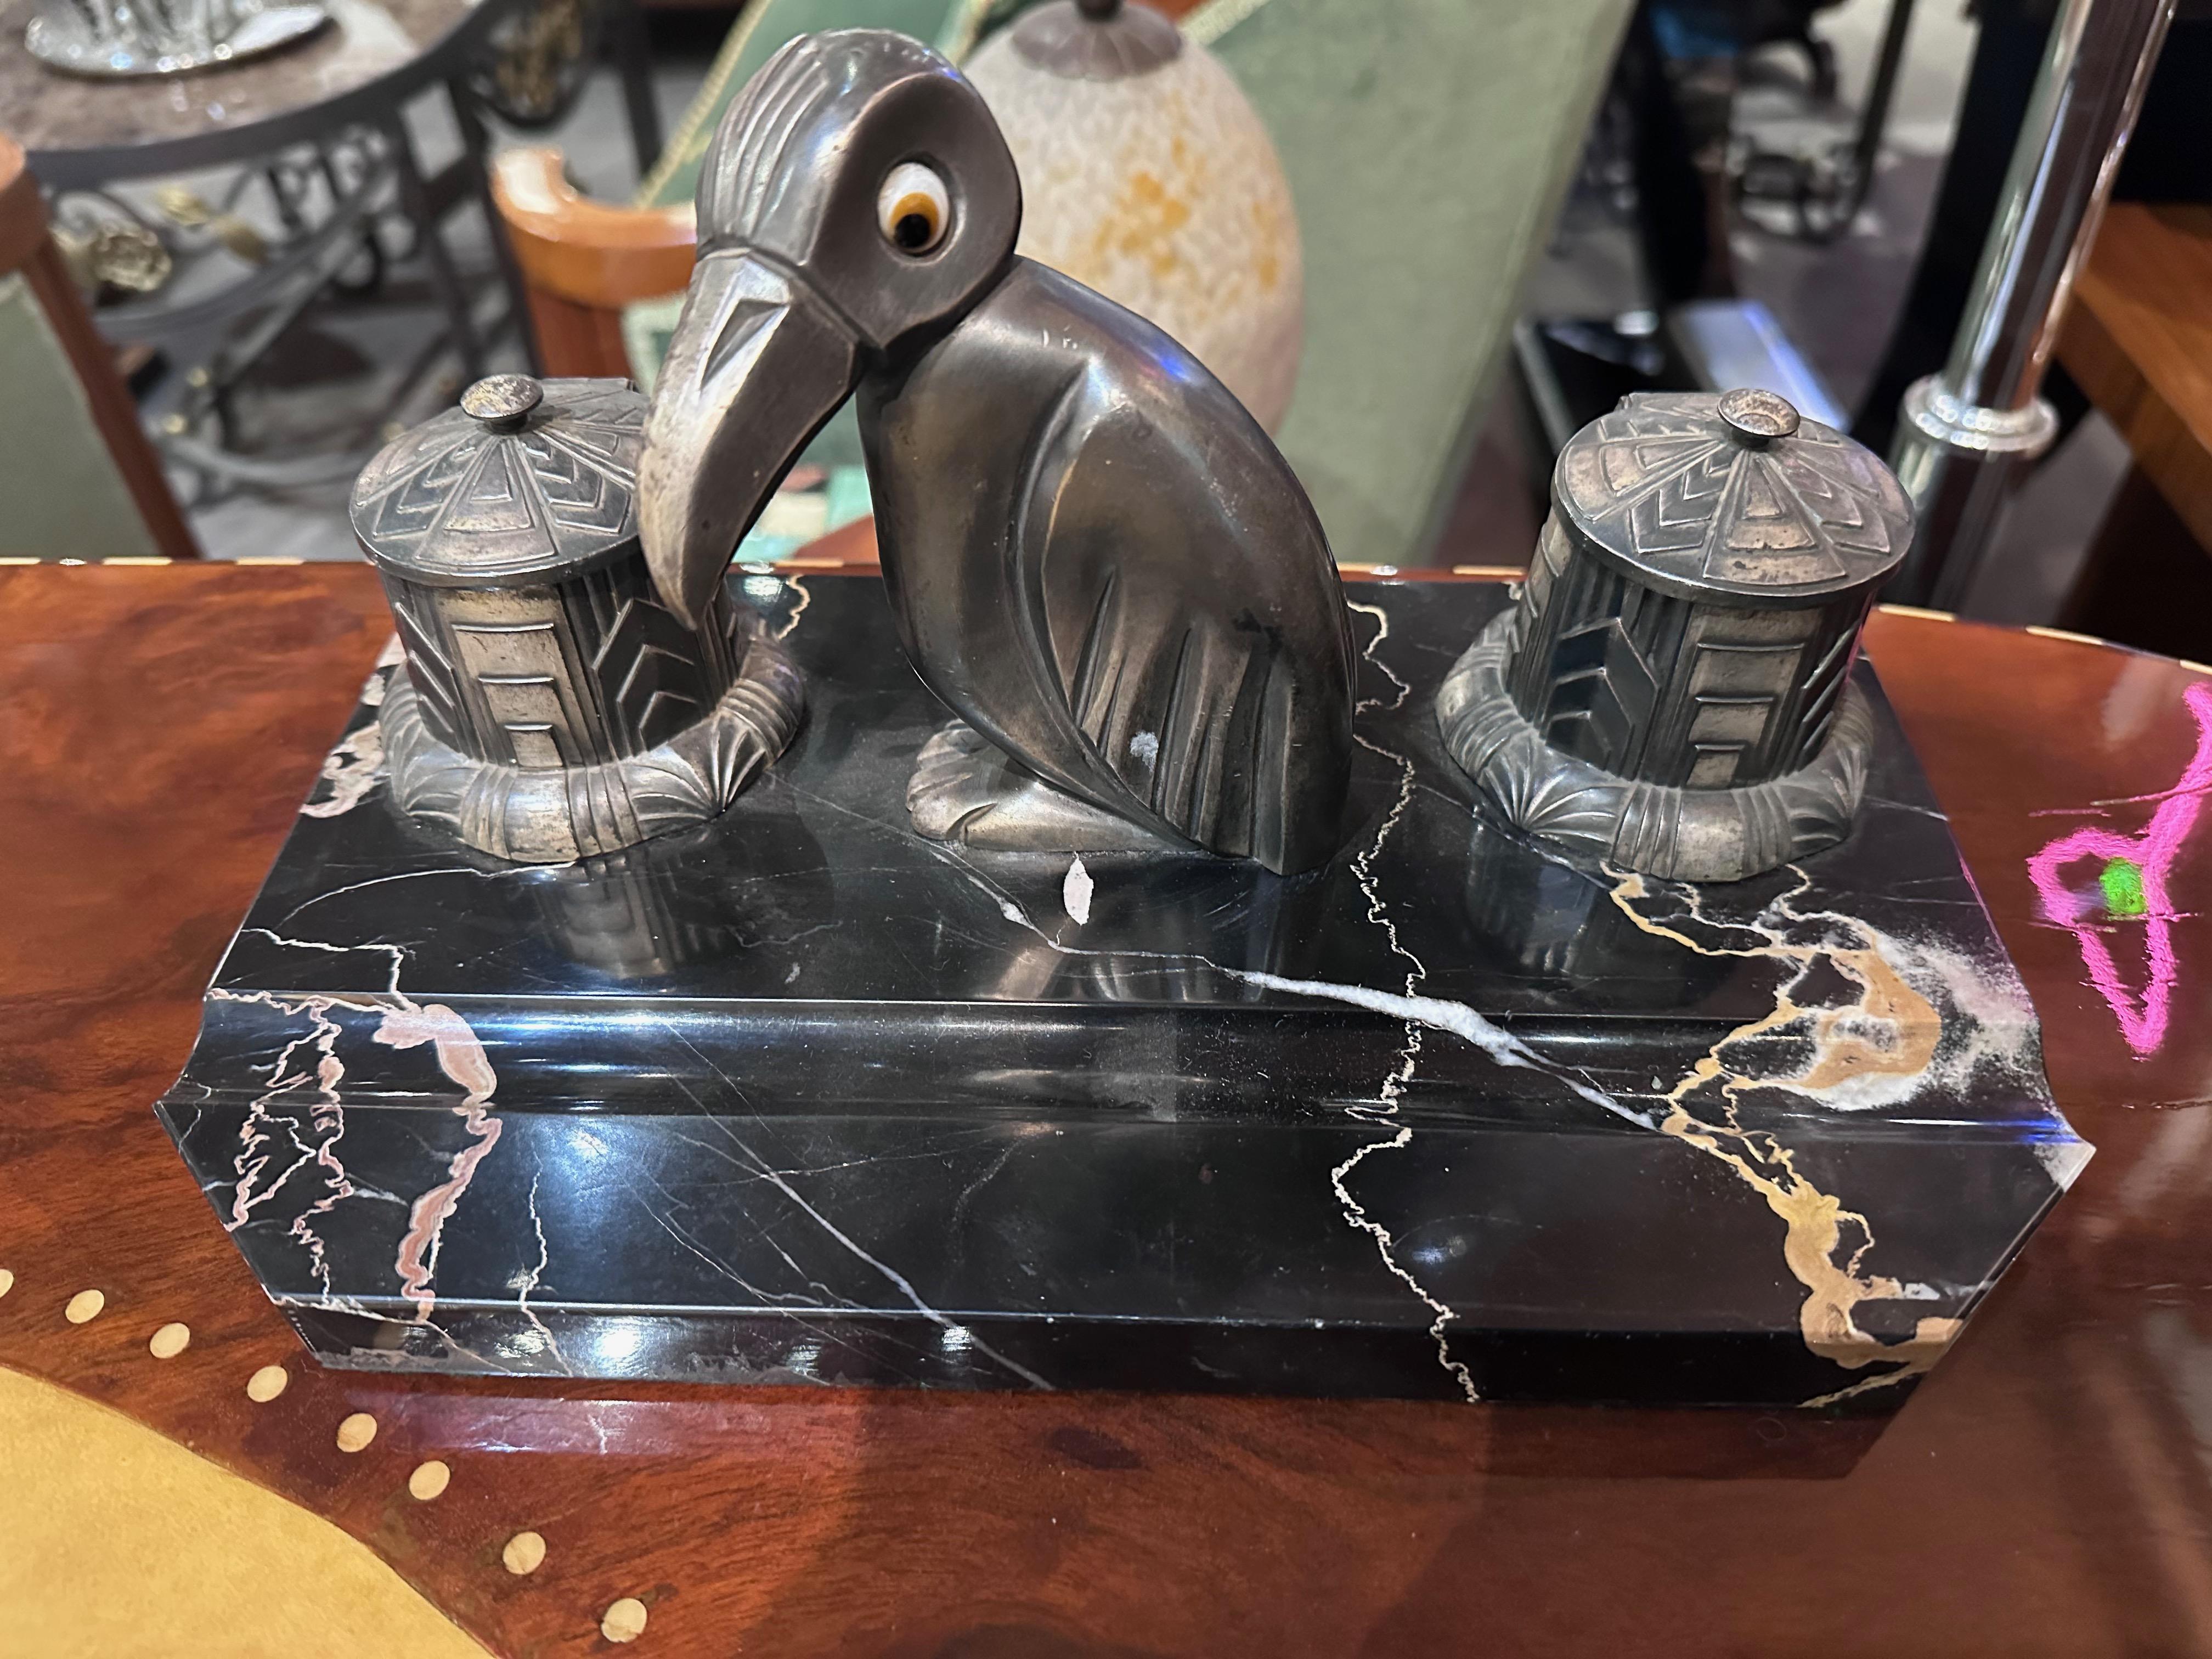 Art Deco Desk Set is a captivating blend of timeless elegance and functional design. The centerpiece of this ensemble is the charming Penguin Statue, reminiscent of the iconic designs by H. Moreau from the glamorous 1930s era. He is known for his